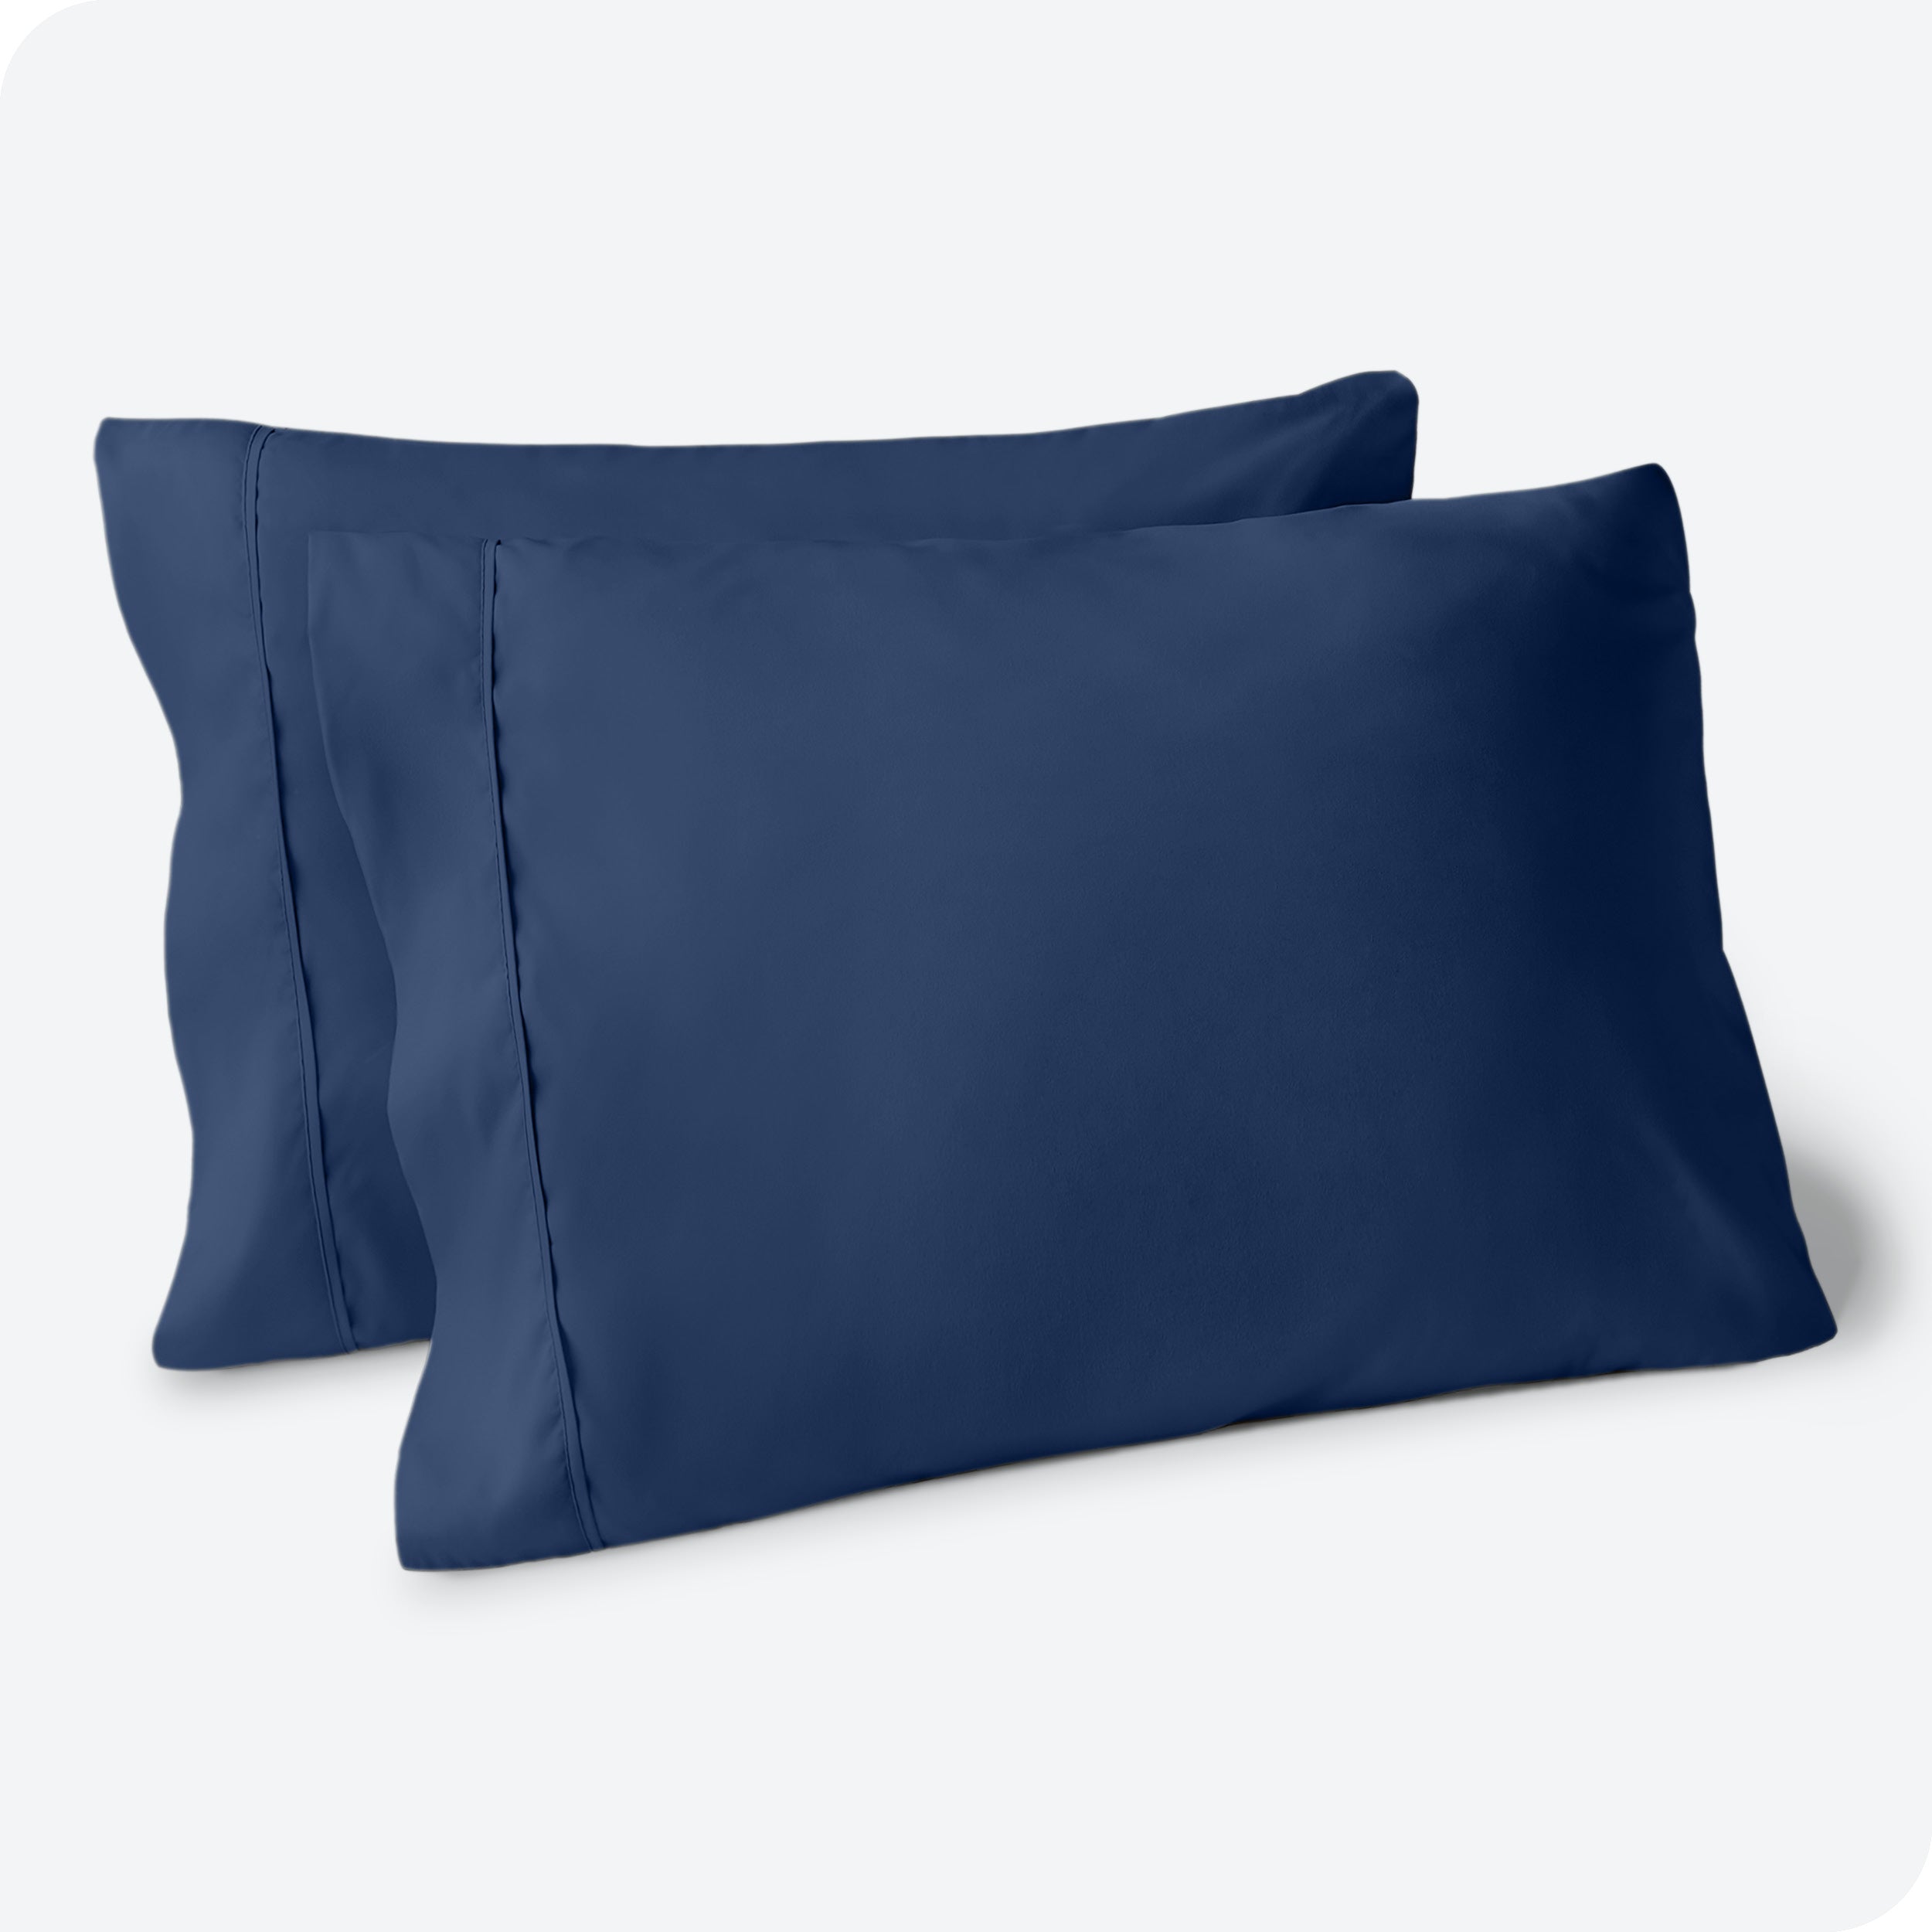 Two pillows on a white background with blue pillowcases on them